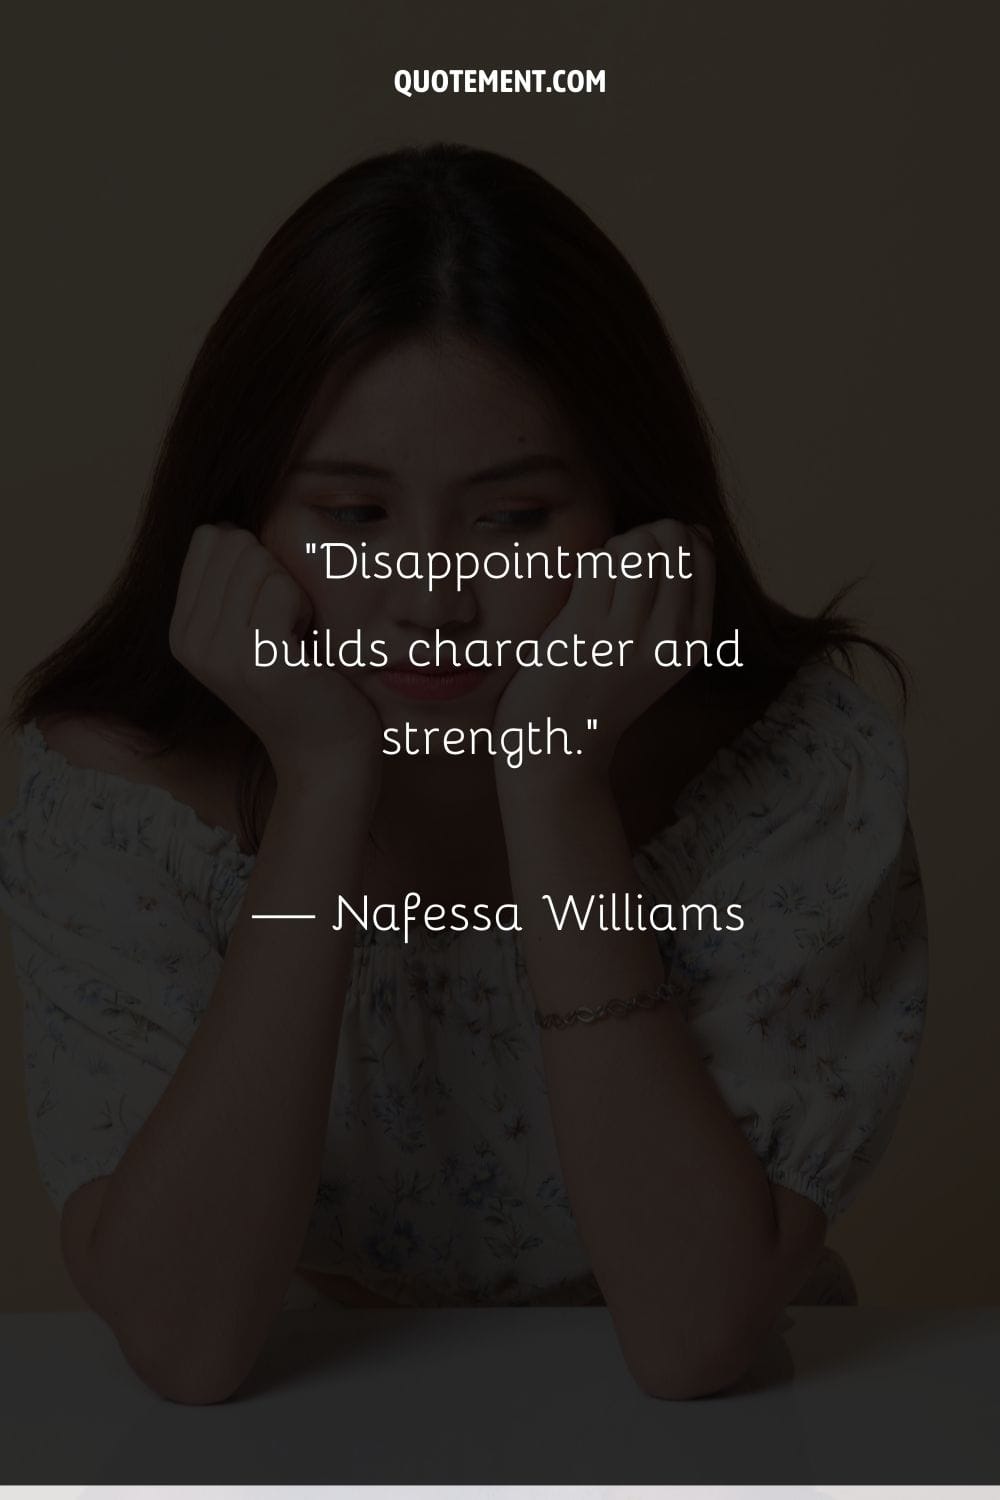 Disappointment builds character and strength